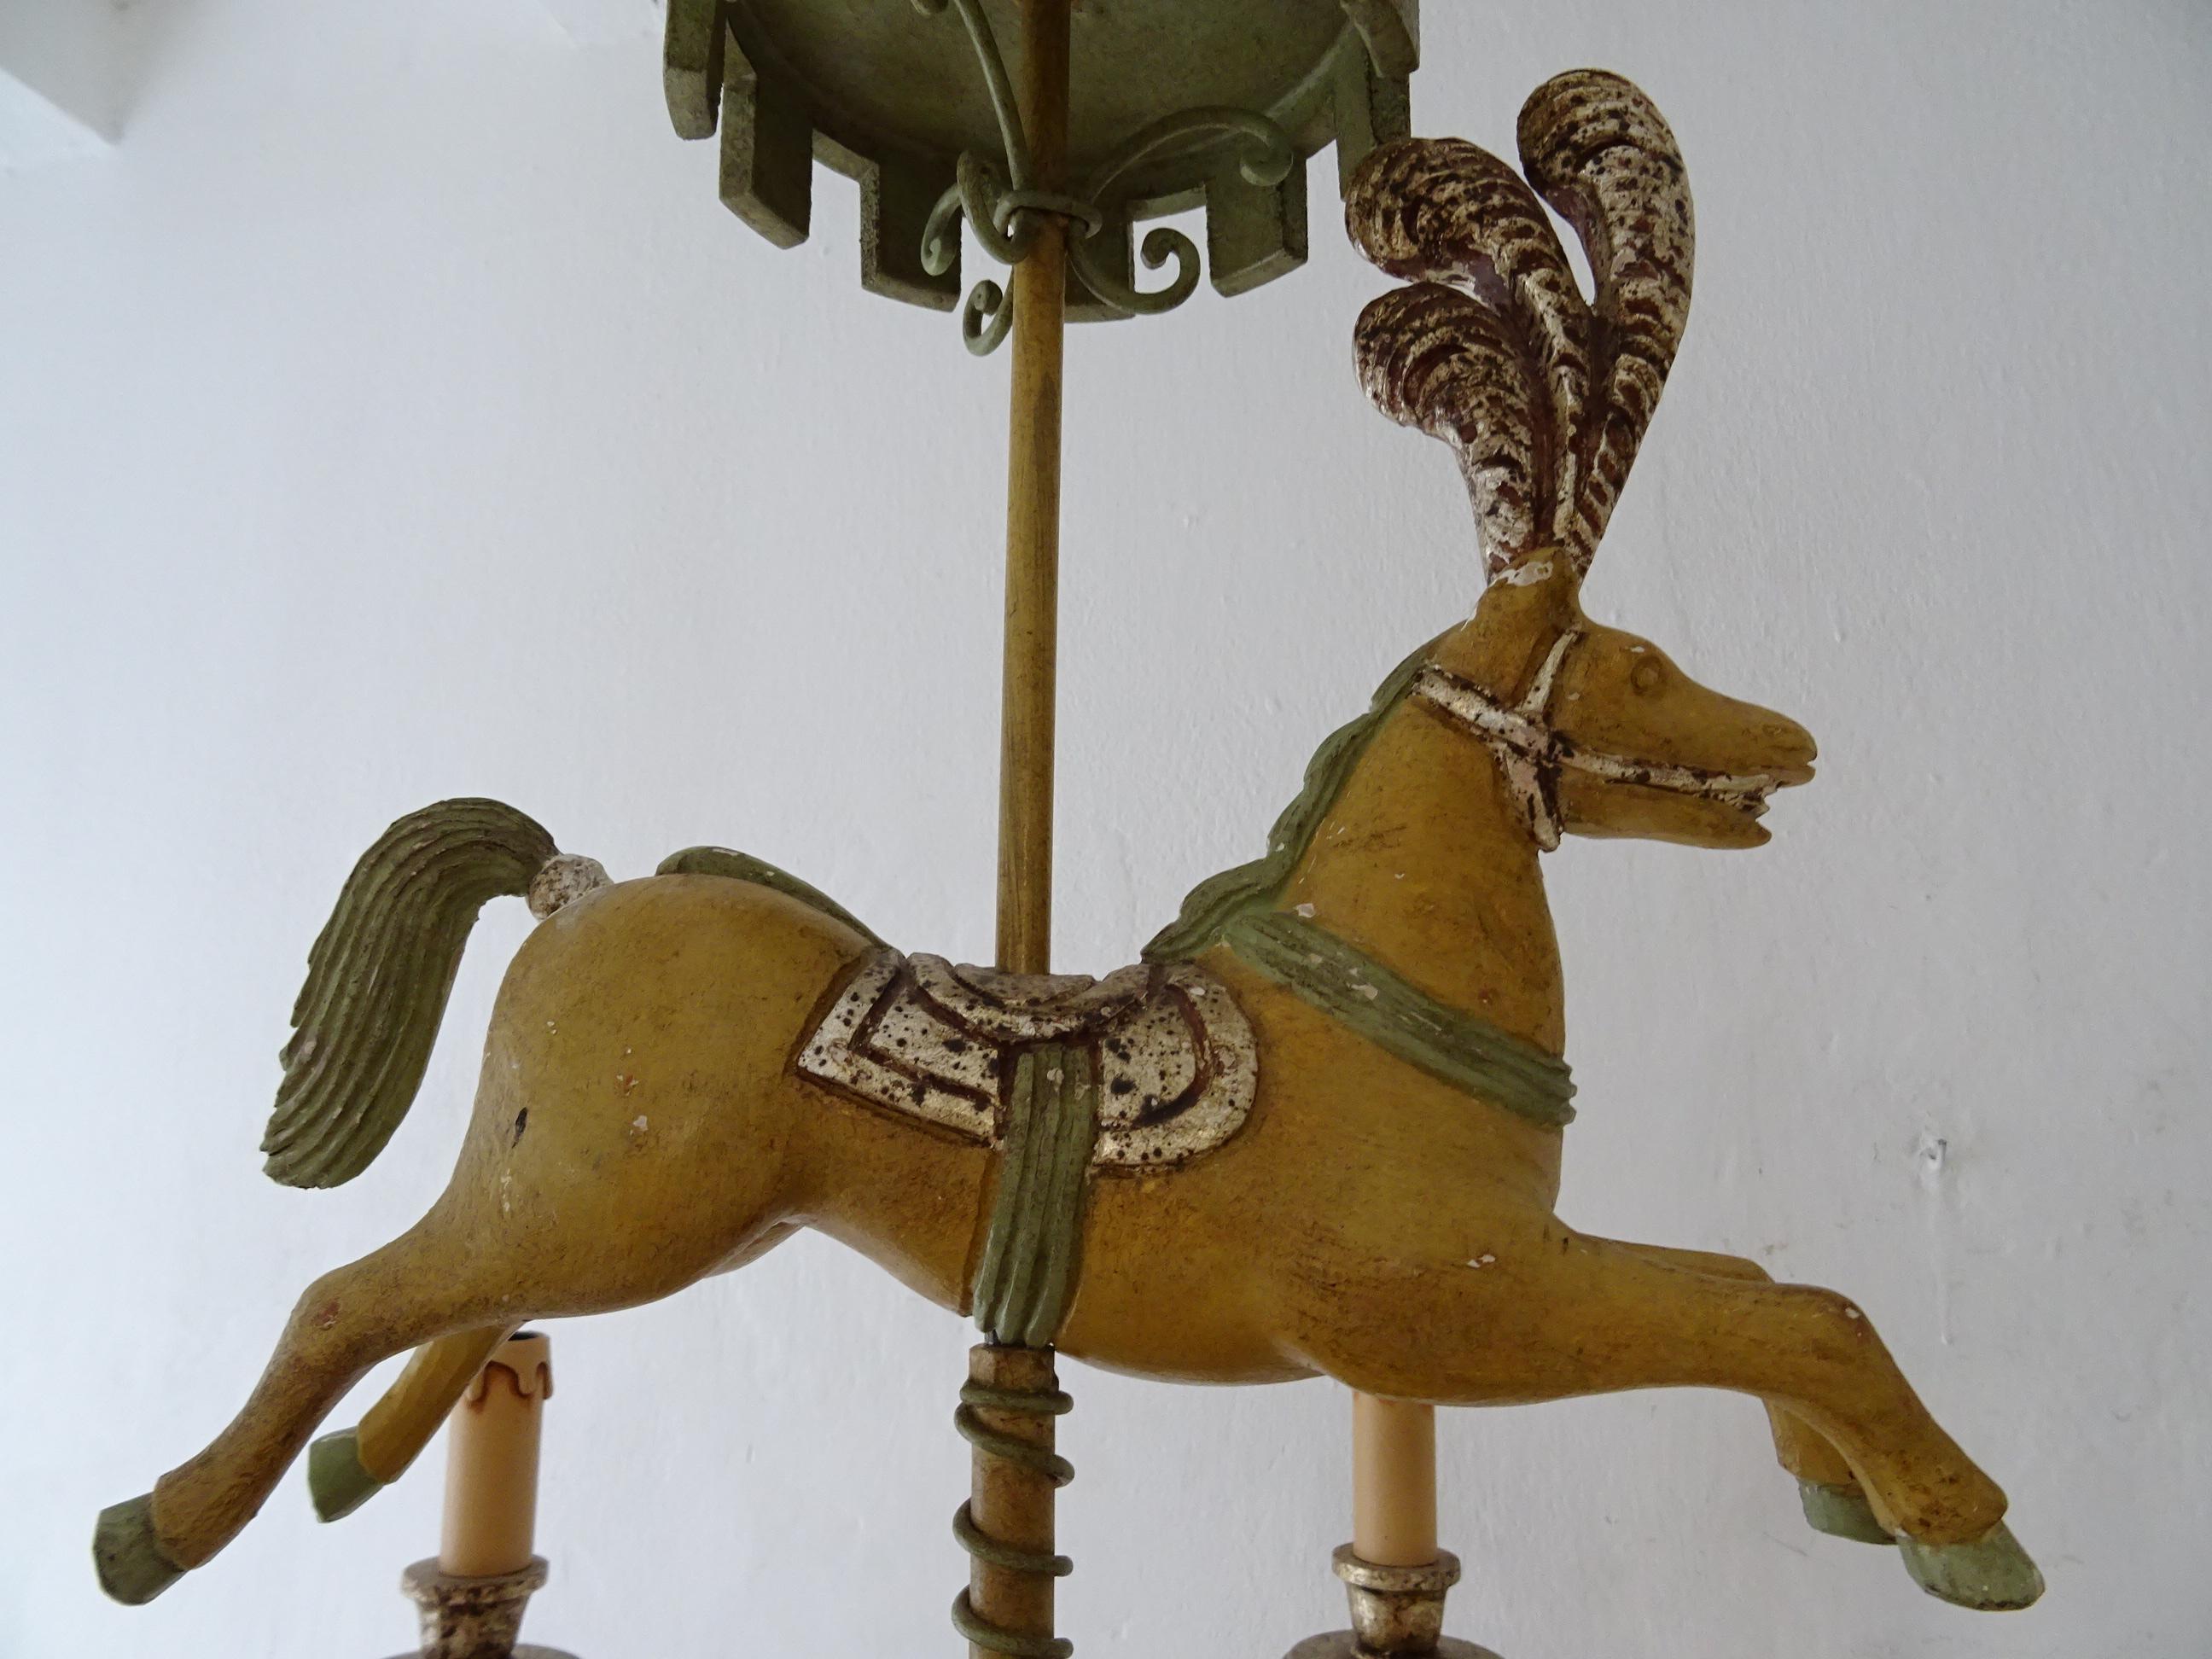 Housing 6 lights. Will be newly rewired with certified UL US sockets for the United States and appropriate sockets for all other countries and ready to hang. Original color tole polychrome throughout. Incredible details on horse with feathers. Horse